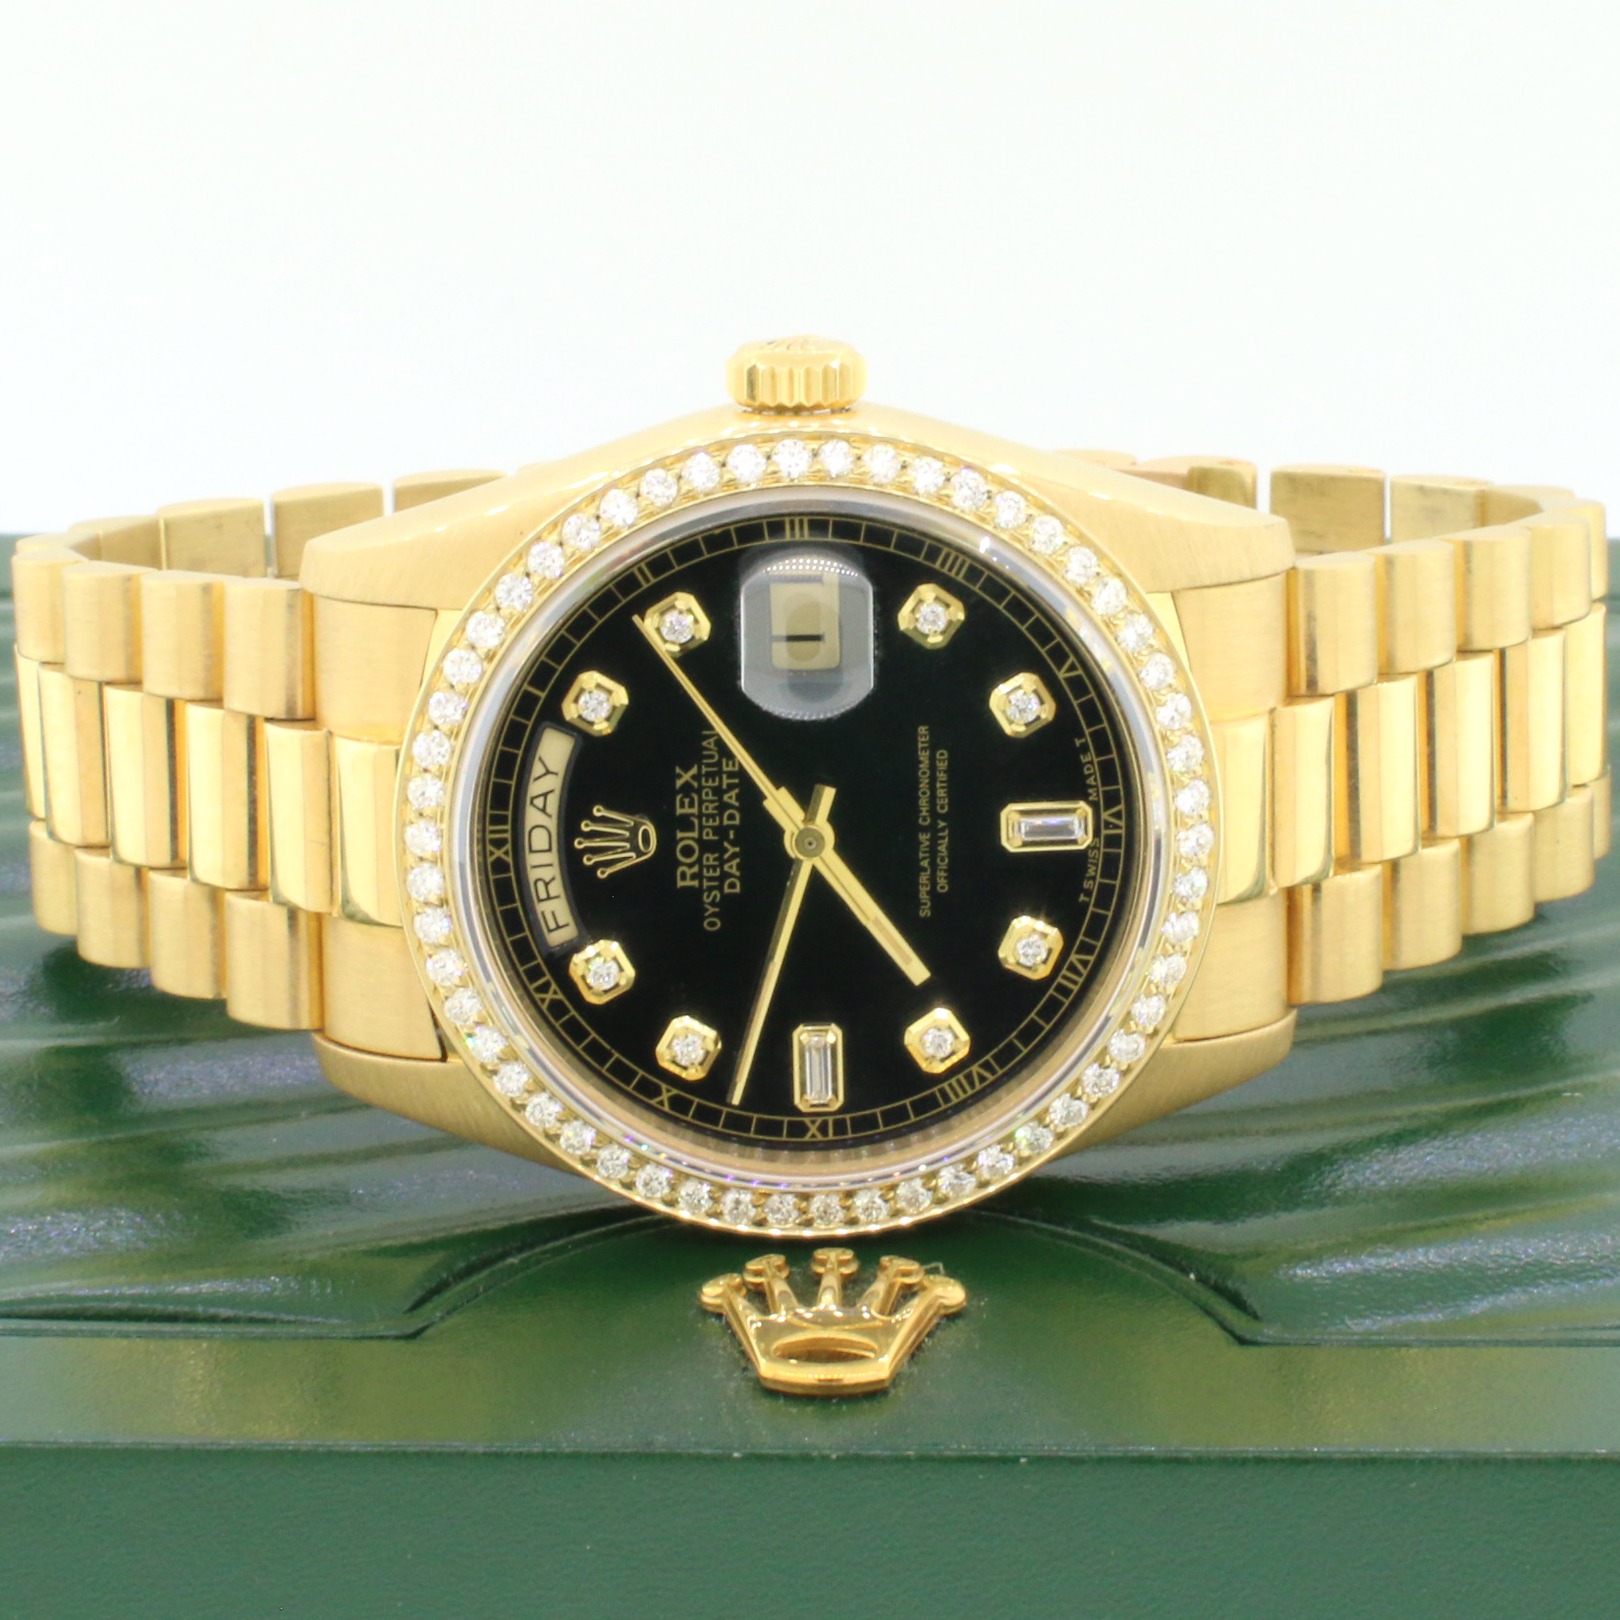 Rolex President Day-Date 36mm 18K Yellow Gold Automatic Watch | eBay